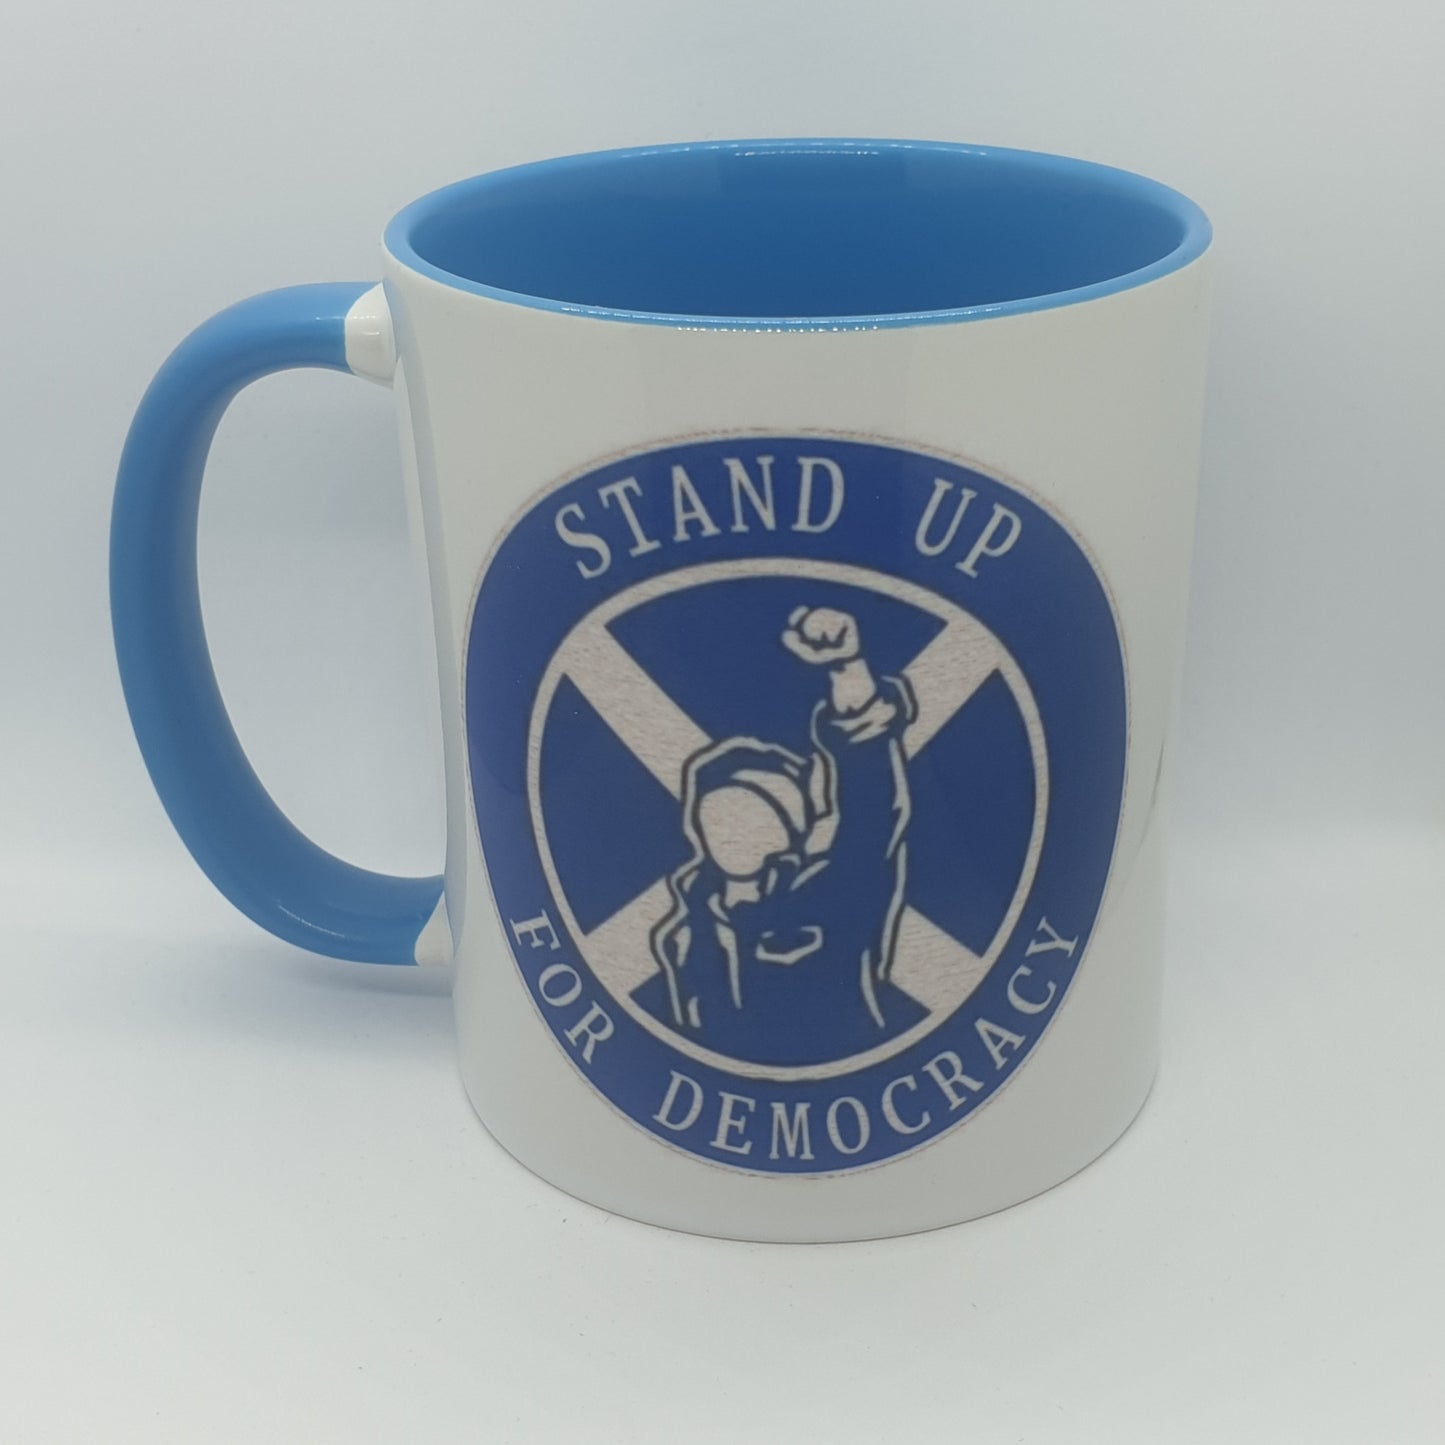 Stand up for democracy saltire fist in the air light blue rim and handled mug